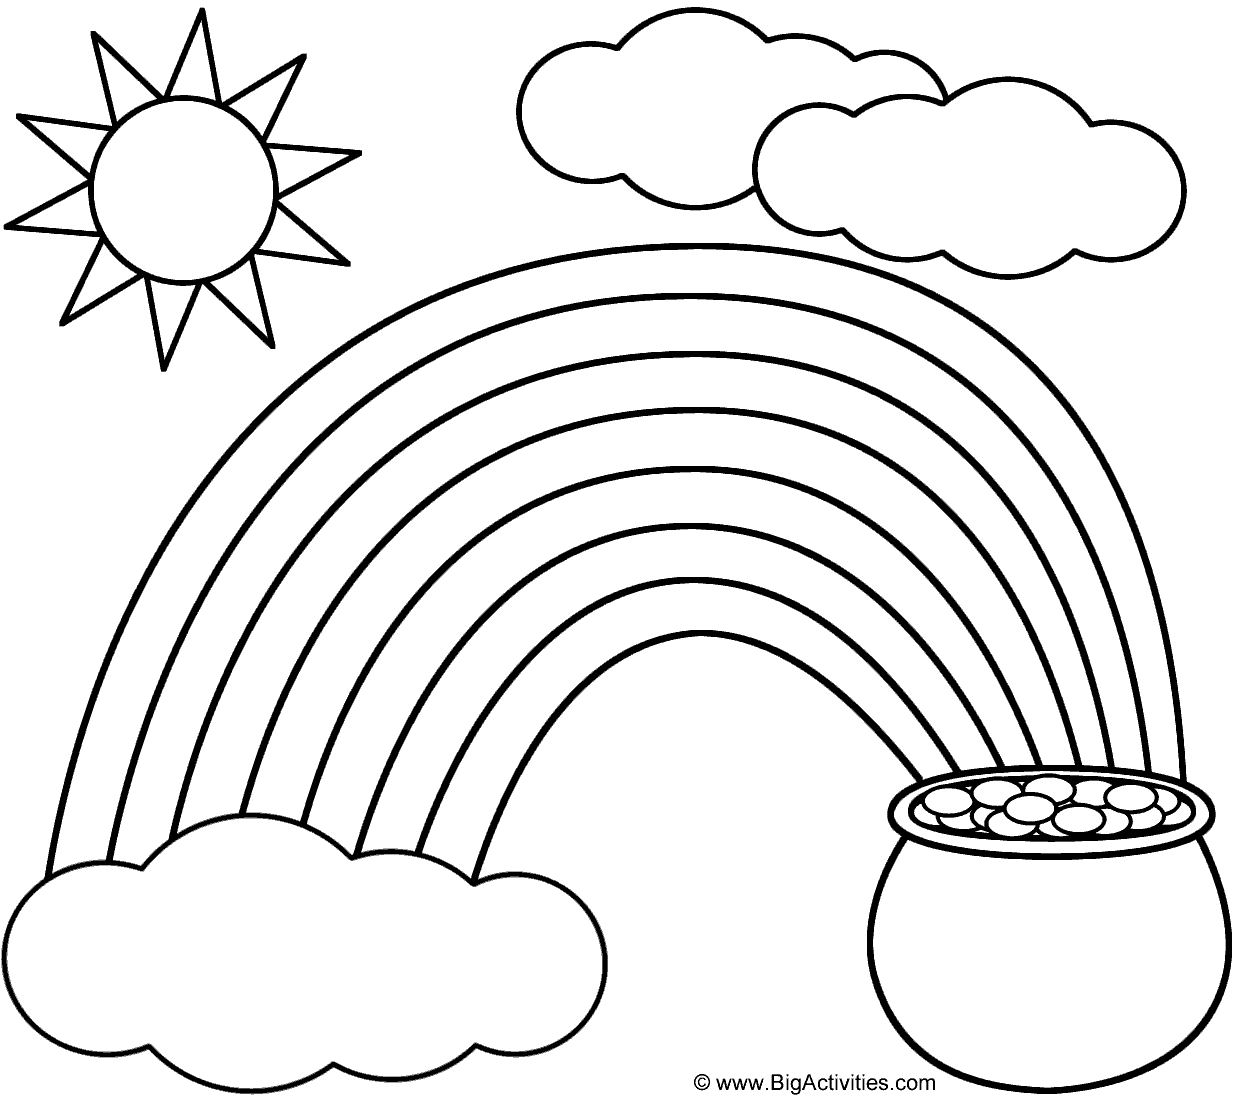  Rainbow  Pot of Gold Sun and Clouds Coloring  Page  St 